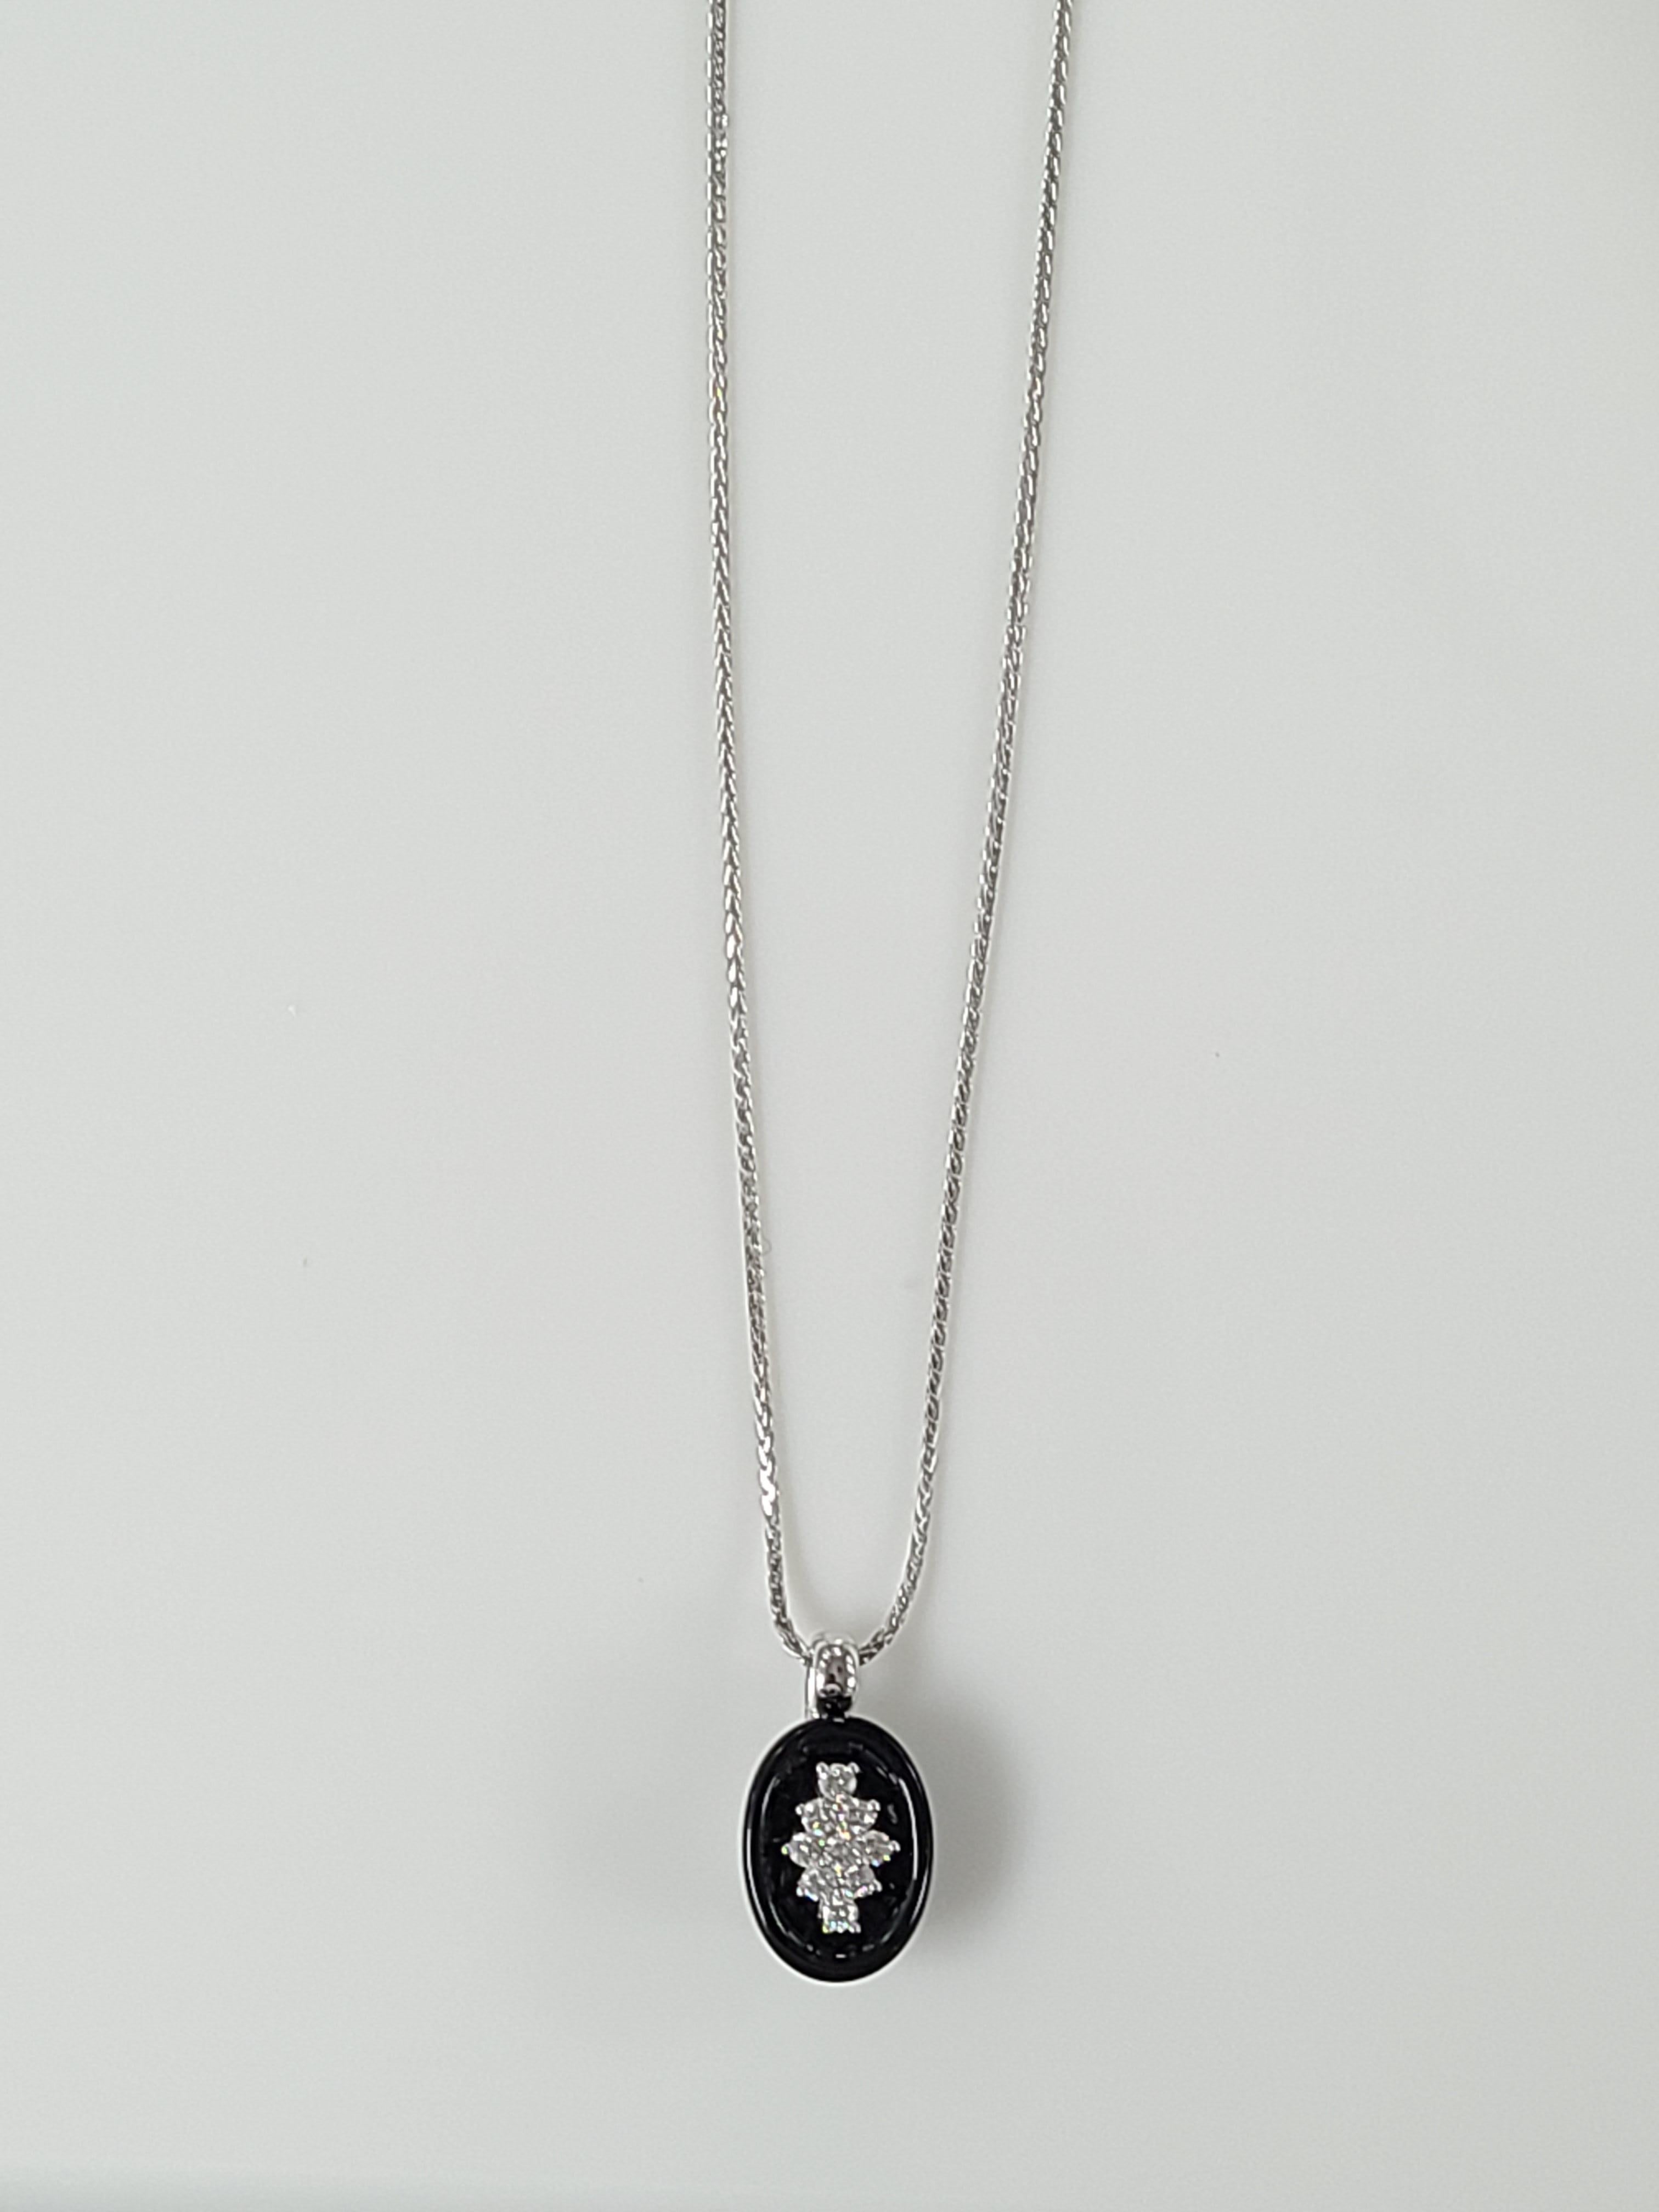 A beautifully designed pendant set in 18k white gold with onyx and diamonds . The length of chain with pendant approx in cm is 22.5 . The chain also has a efficient and simple mechanism to make the length of chain longer and shorter at ease. The